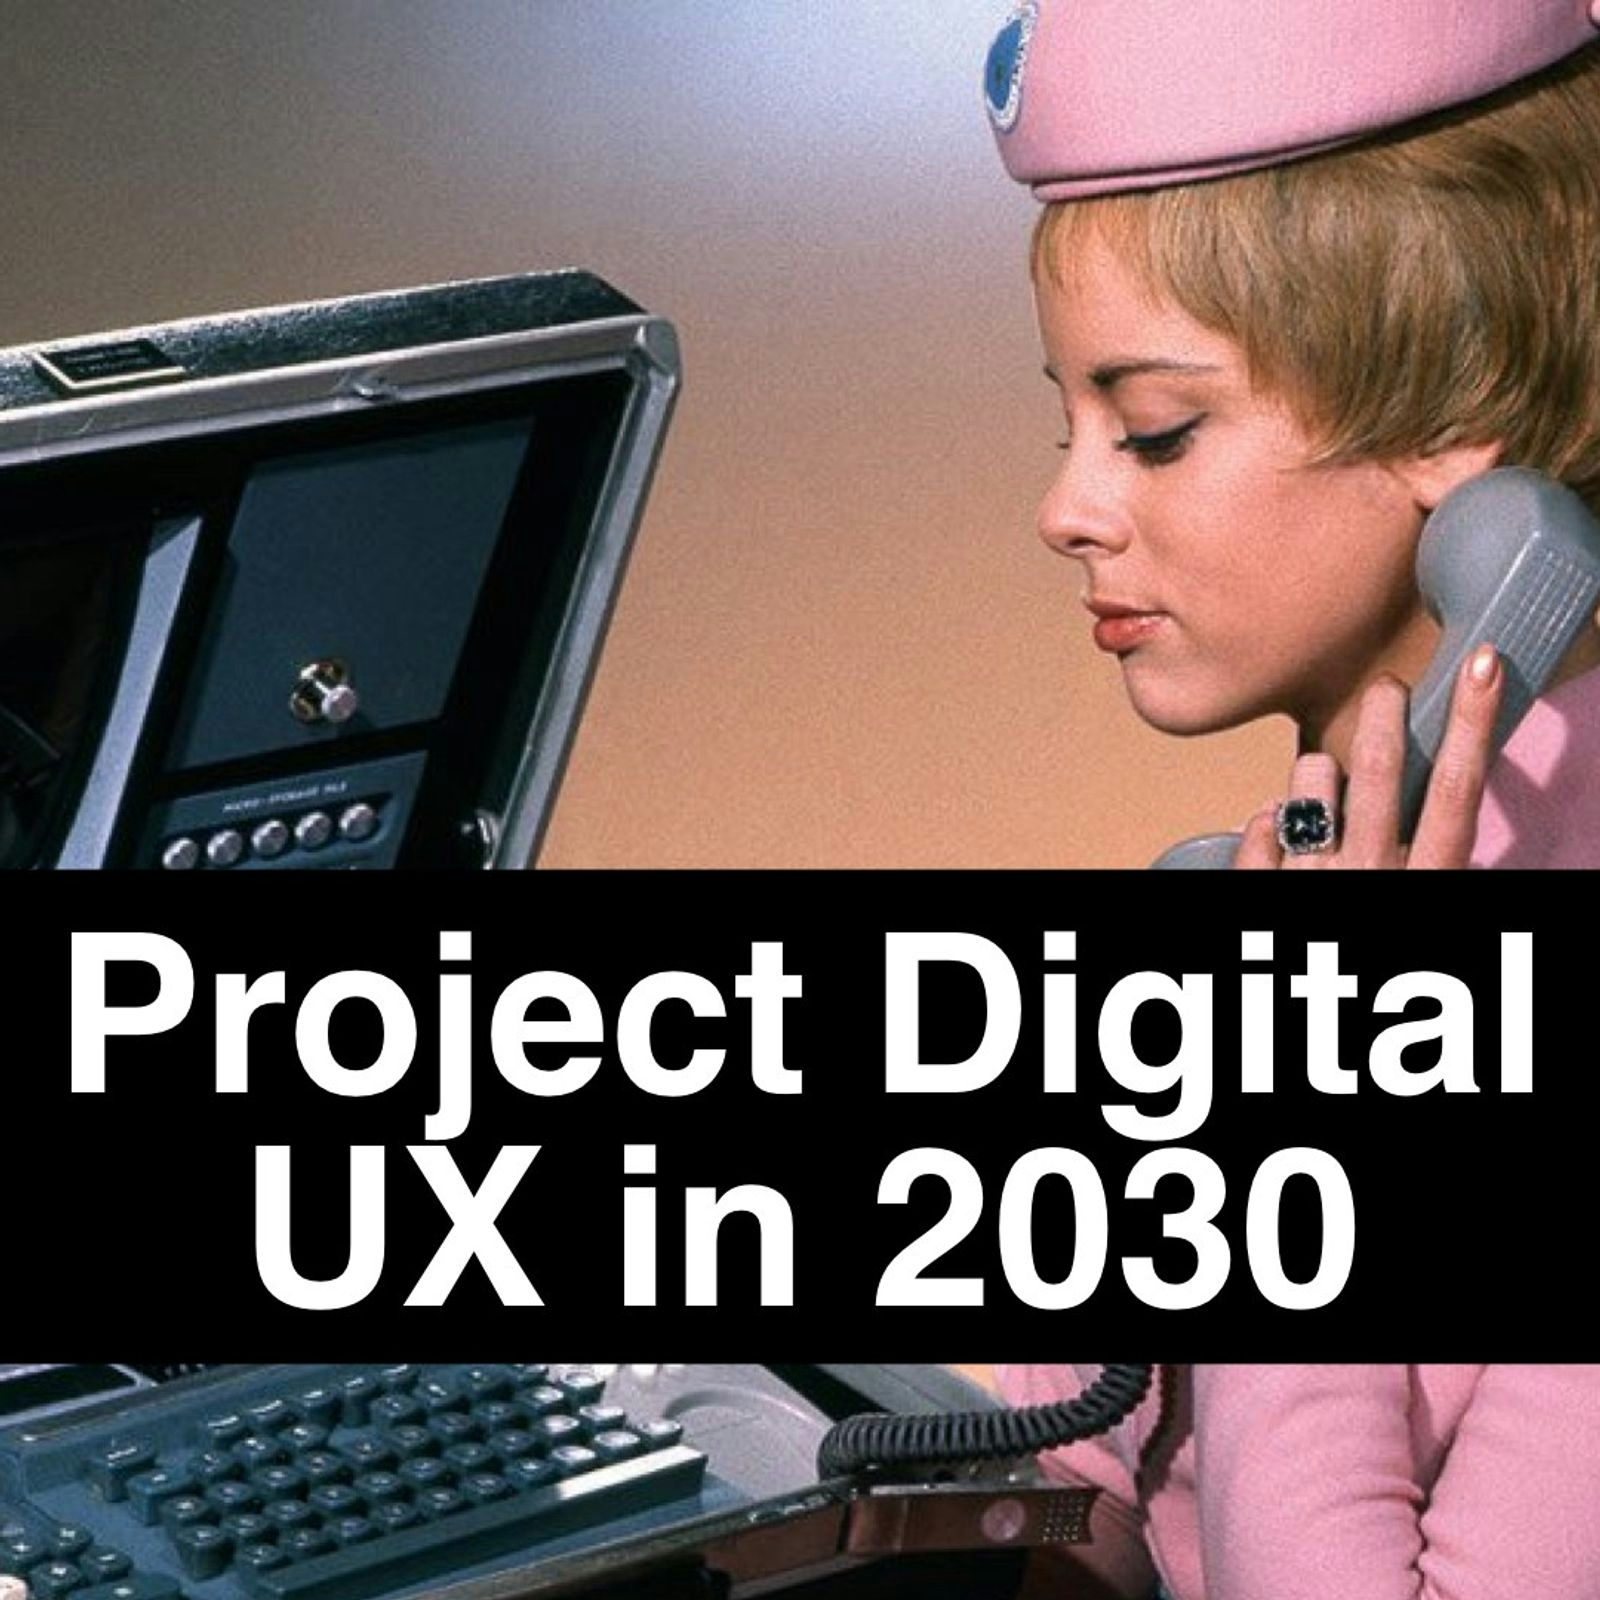 Designing a UX for digital users in 2030, with a multi-office, cross-competence team.